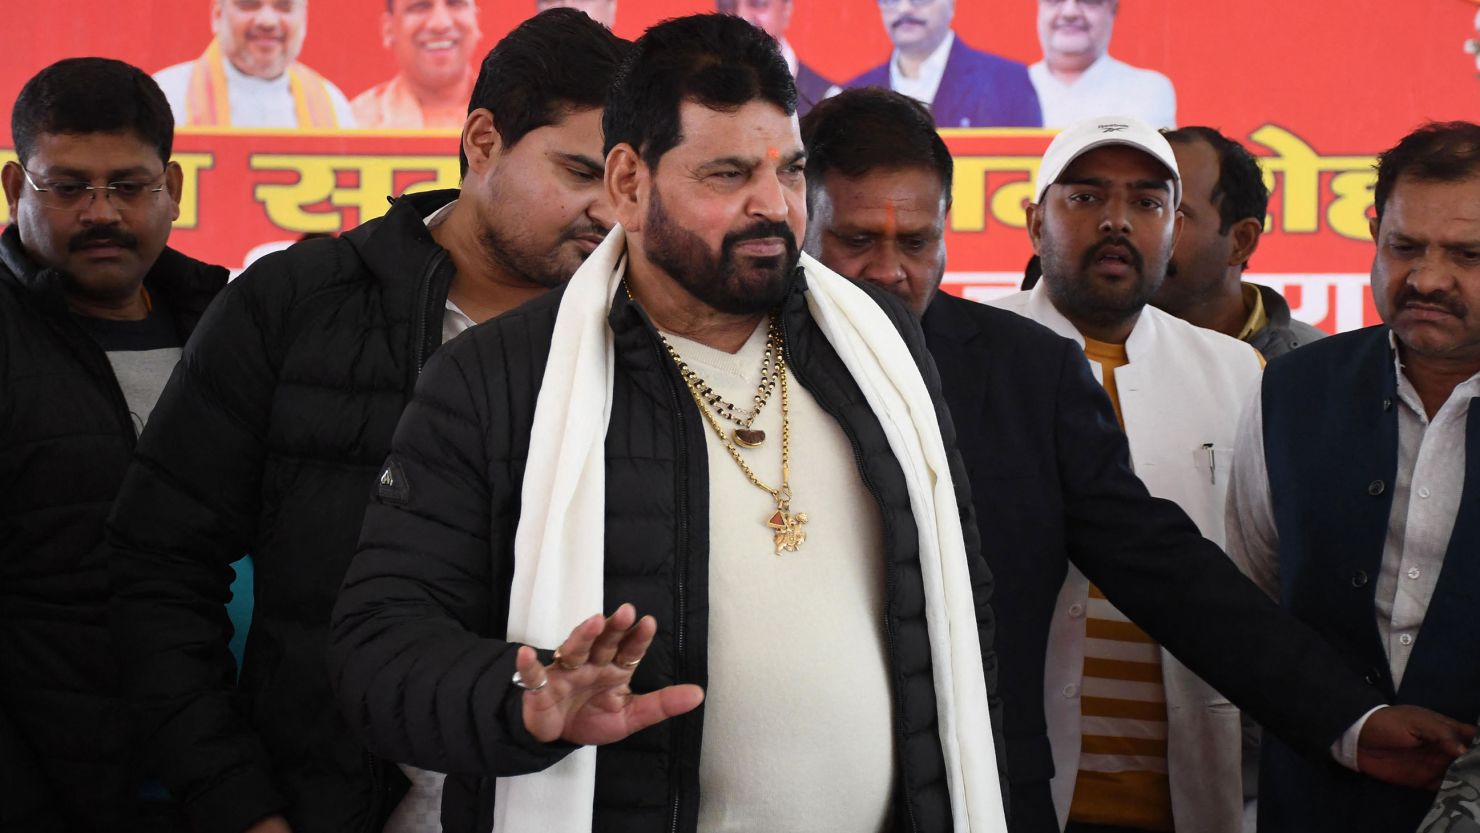 Wrestling Federation of India (WFI) president Brij Bhushan Sharan Singh is facing allegations of sexual harassment from several young athletes. 